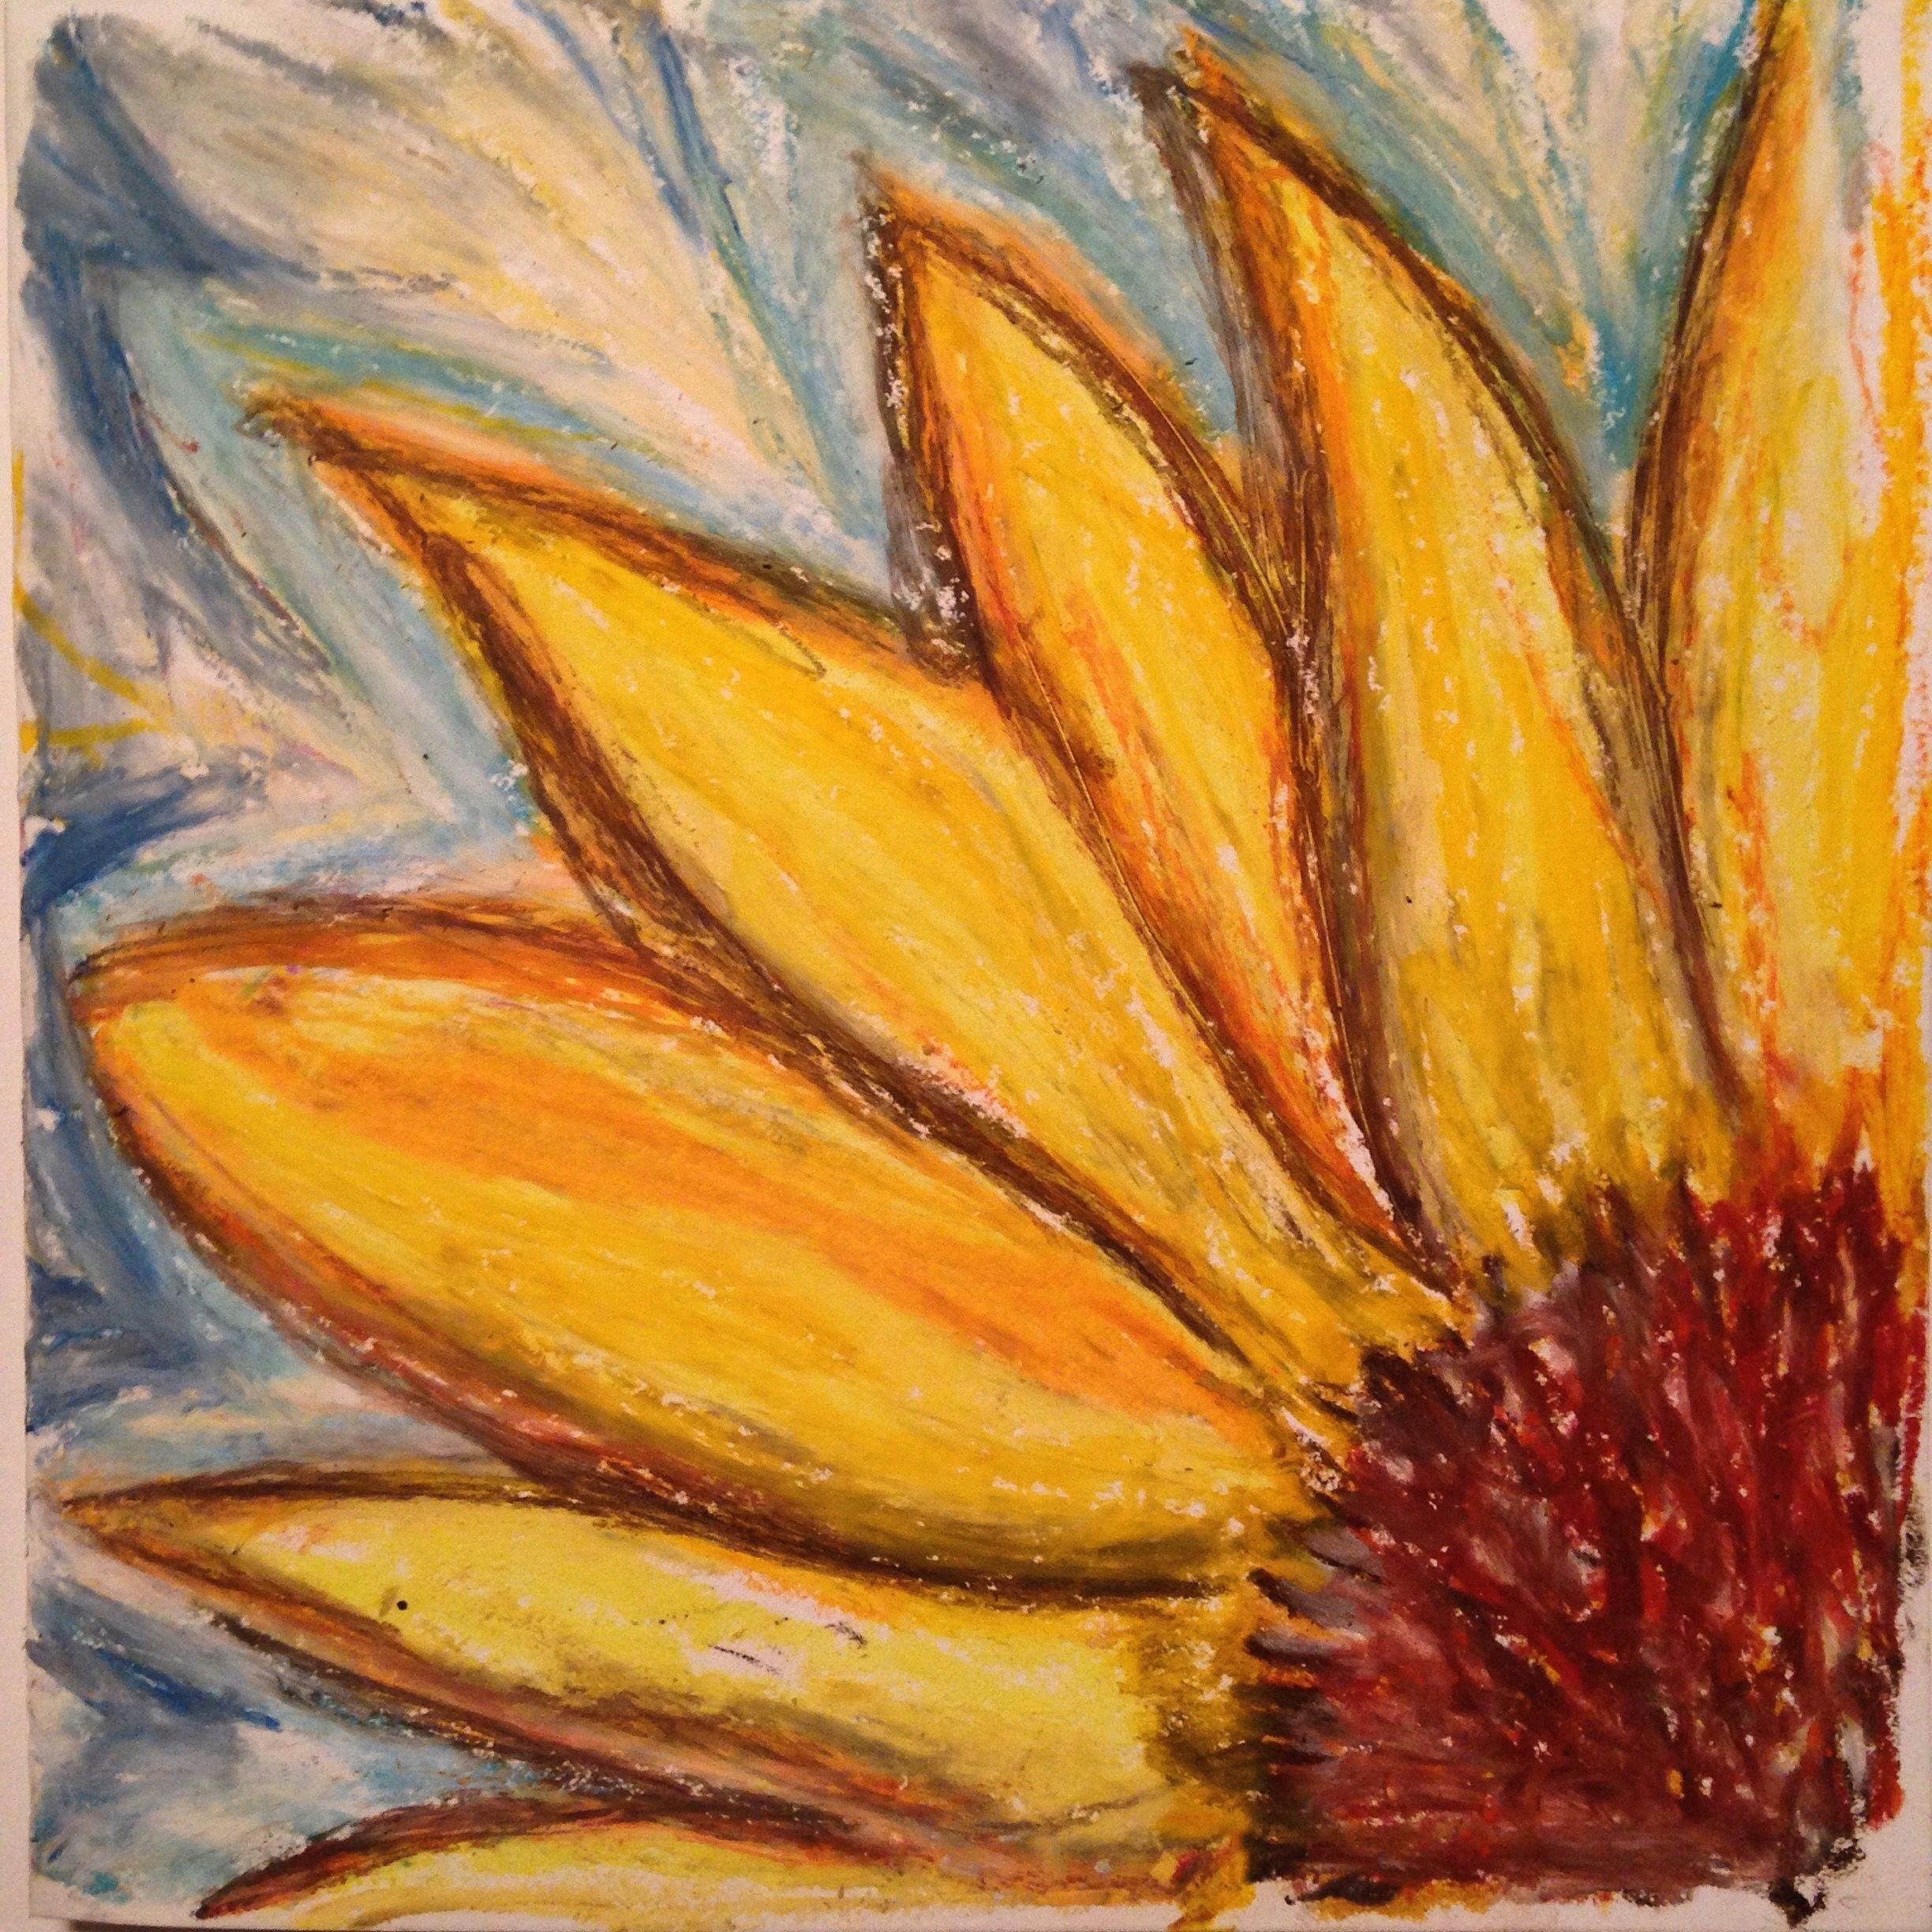 Easy Drawings by Oil Pastels Sunflower Abstract Oil Pastel Drawing by Onny Artbyonny Art